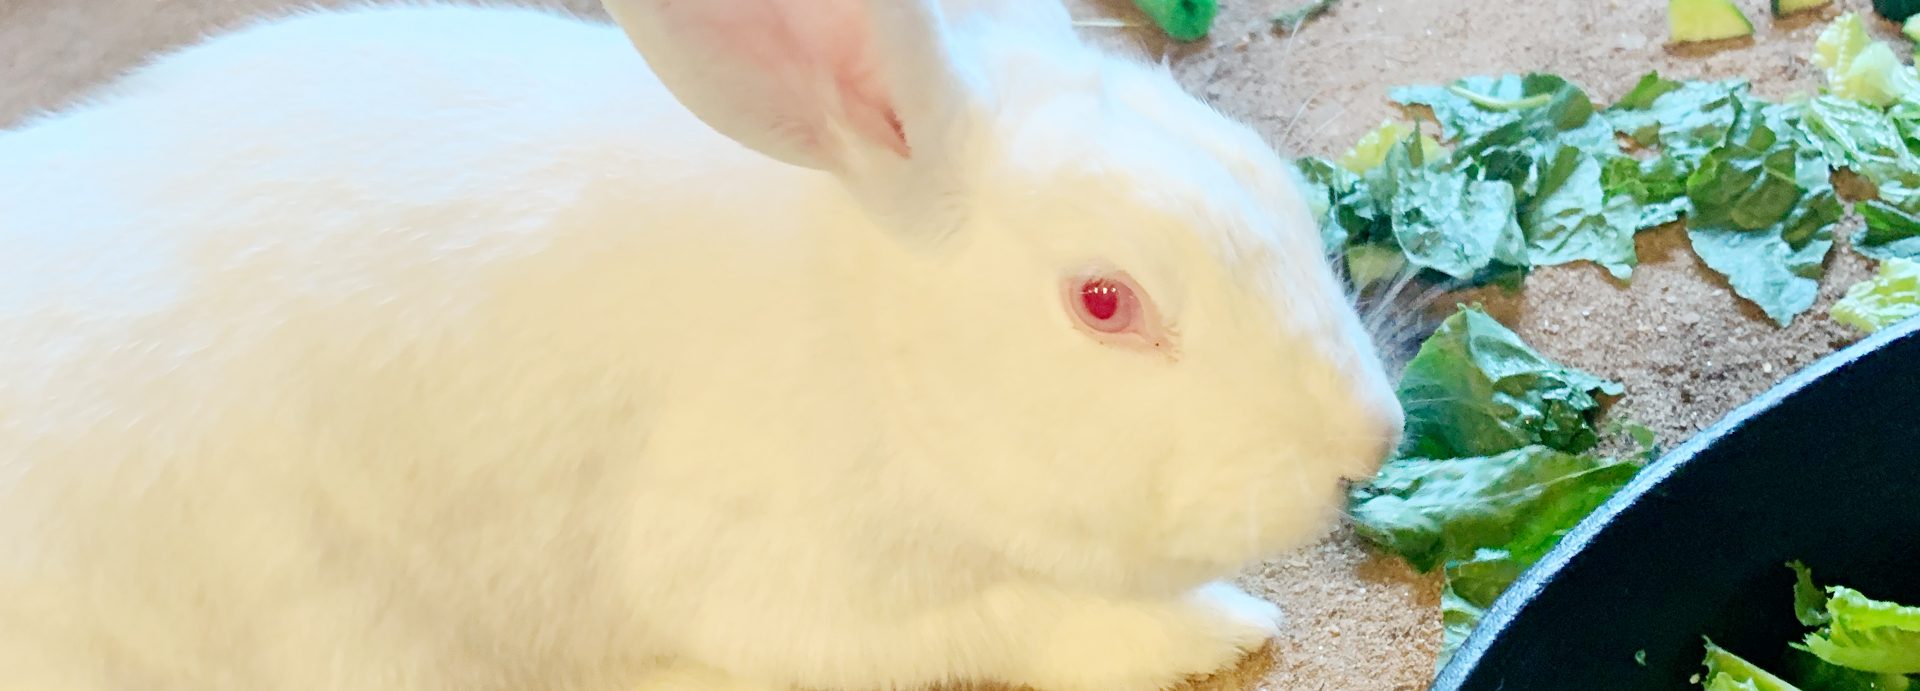 Holly, the Rescued Rabbit Finds Freedom After Spending Her Life in a Test Lab